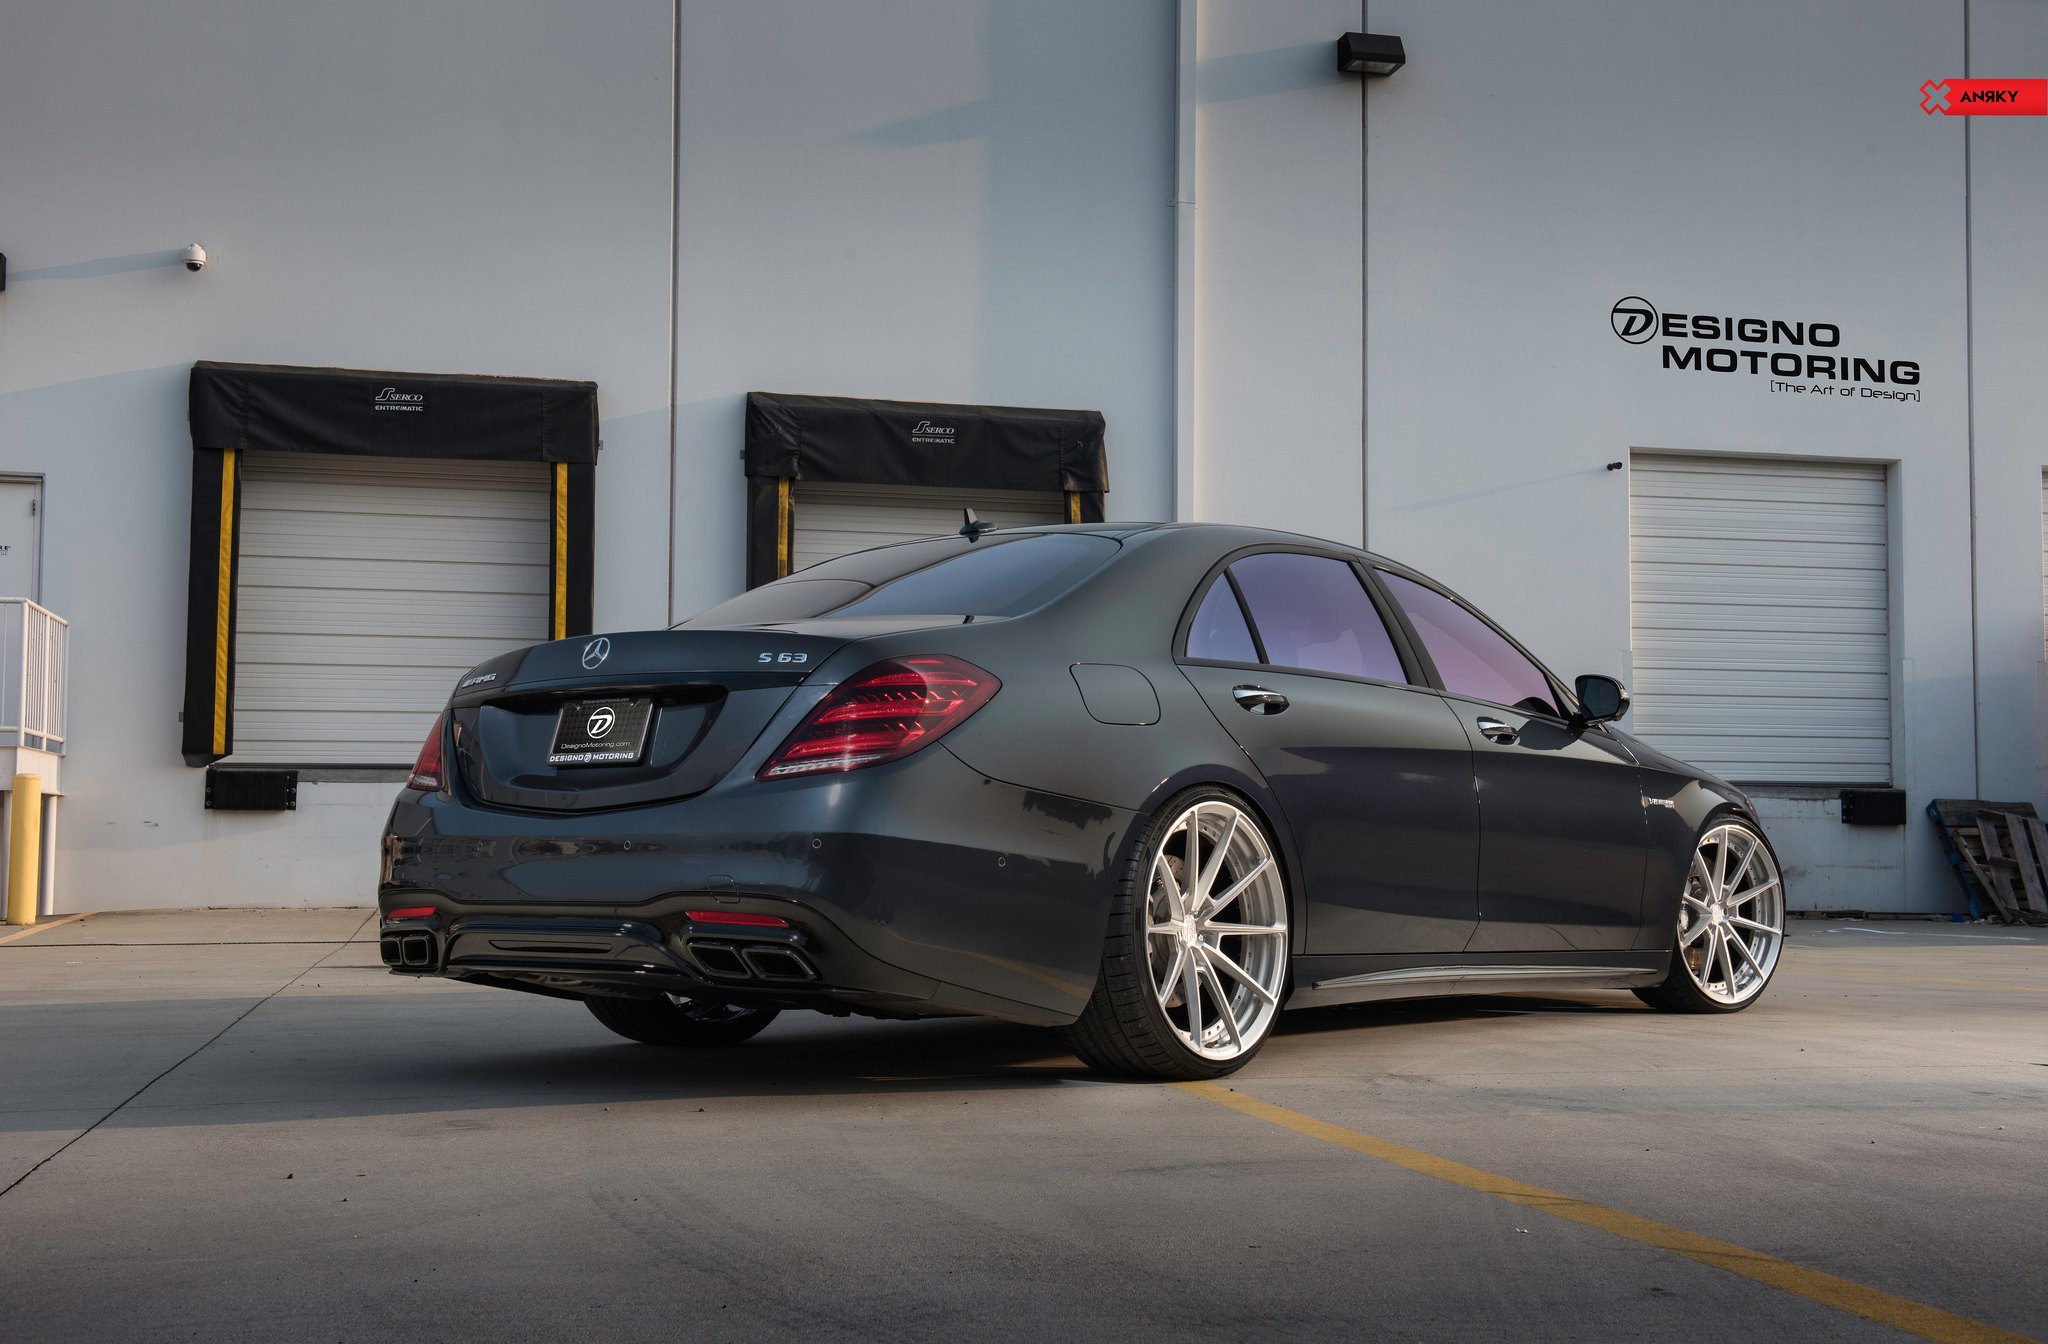 Black Mercedes S Class with Aftermarket Rear Diffuser - Photo by Anrky Wheels